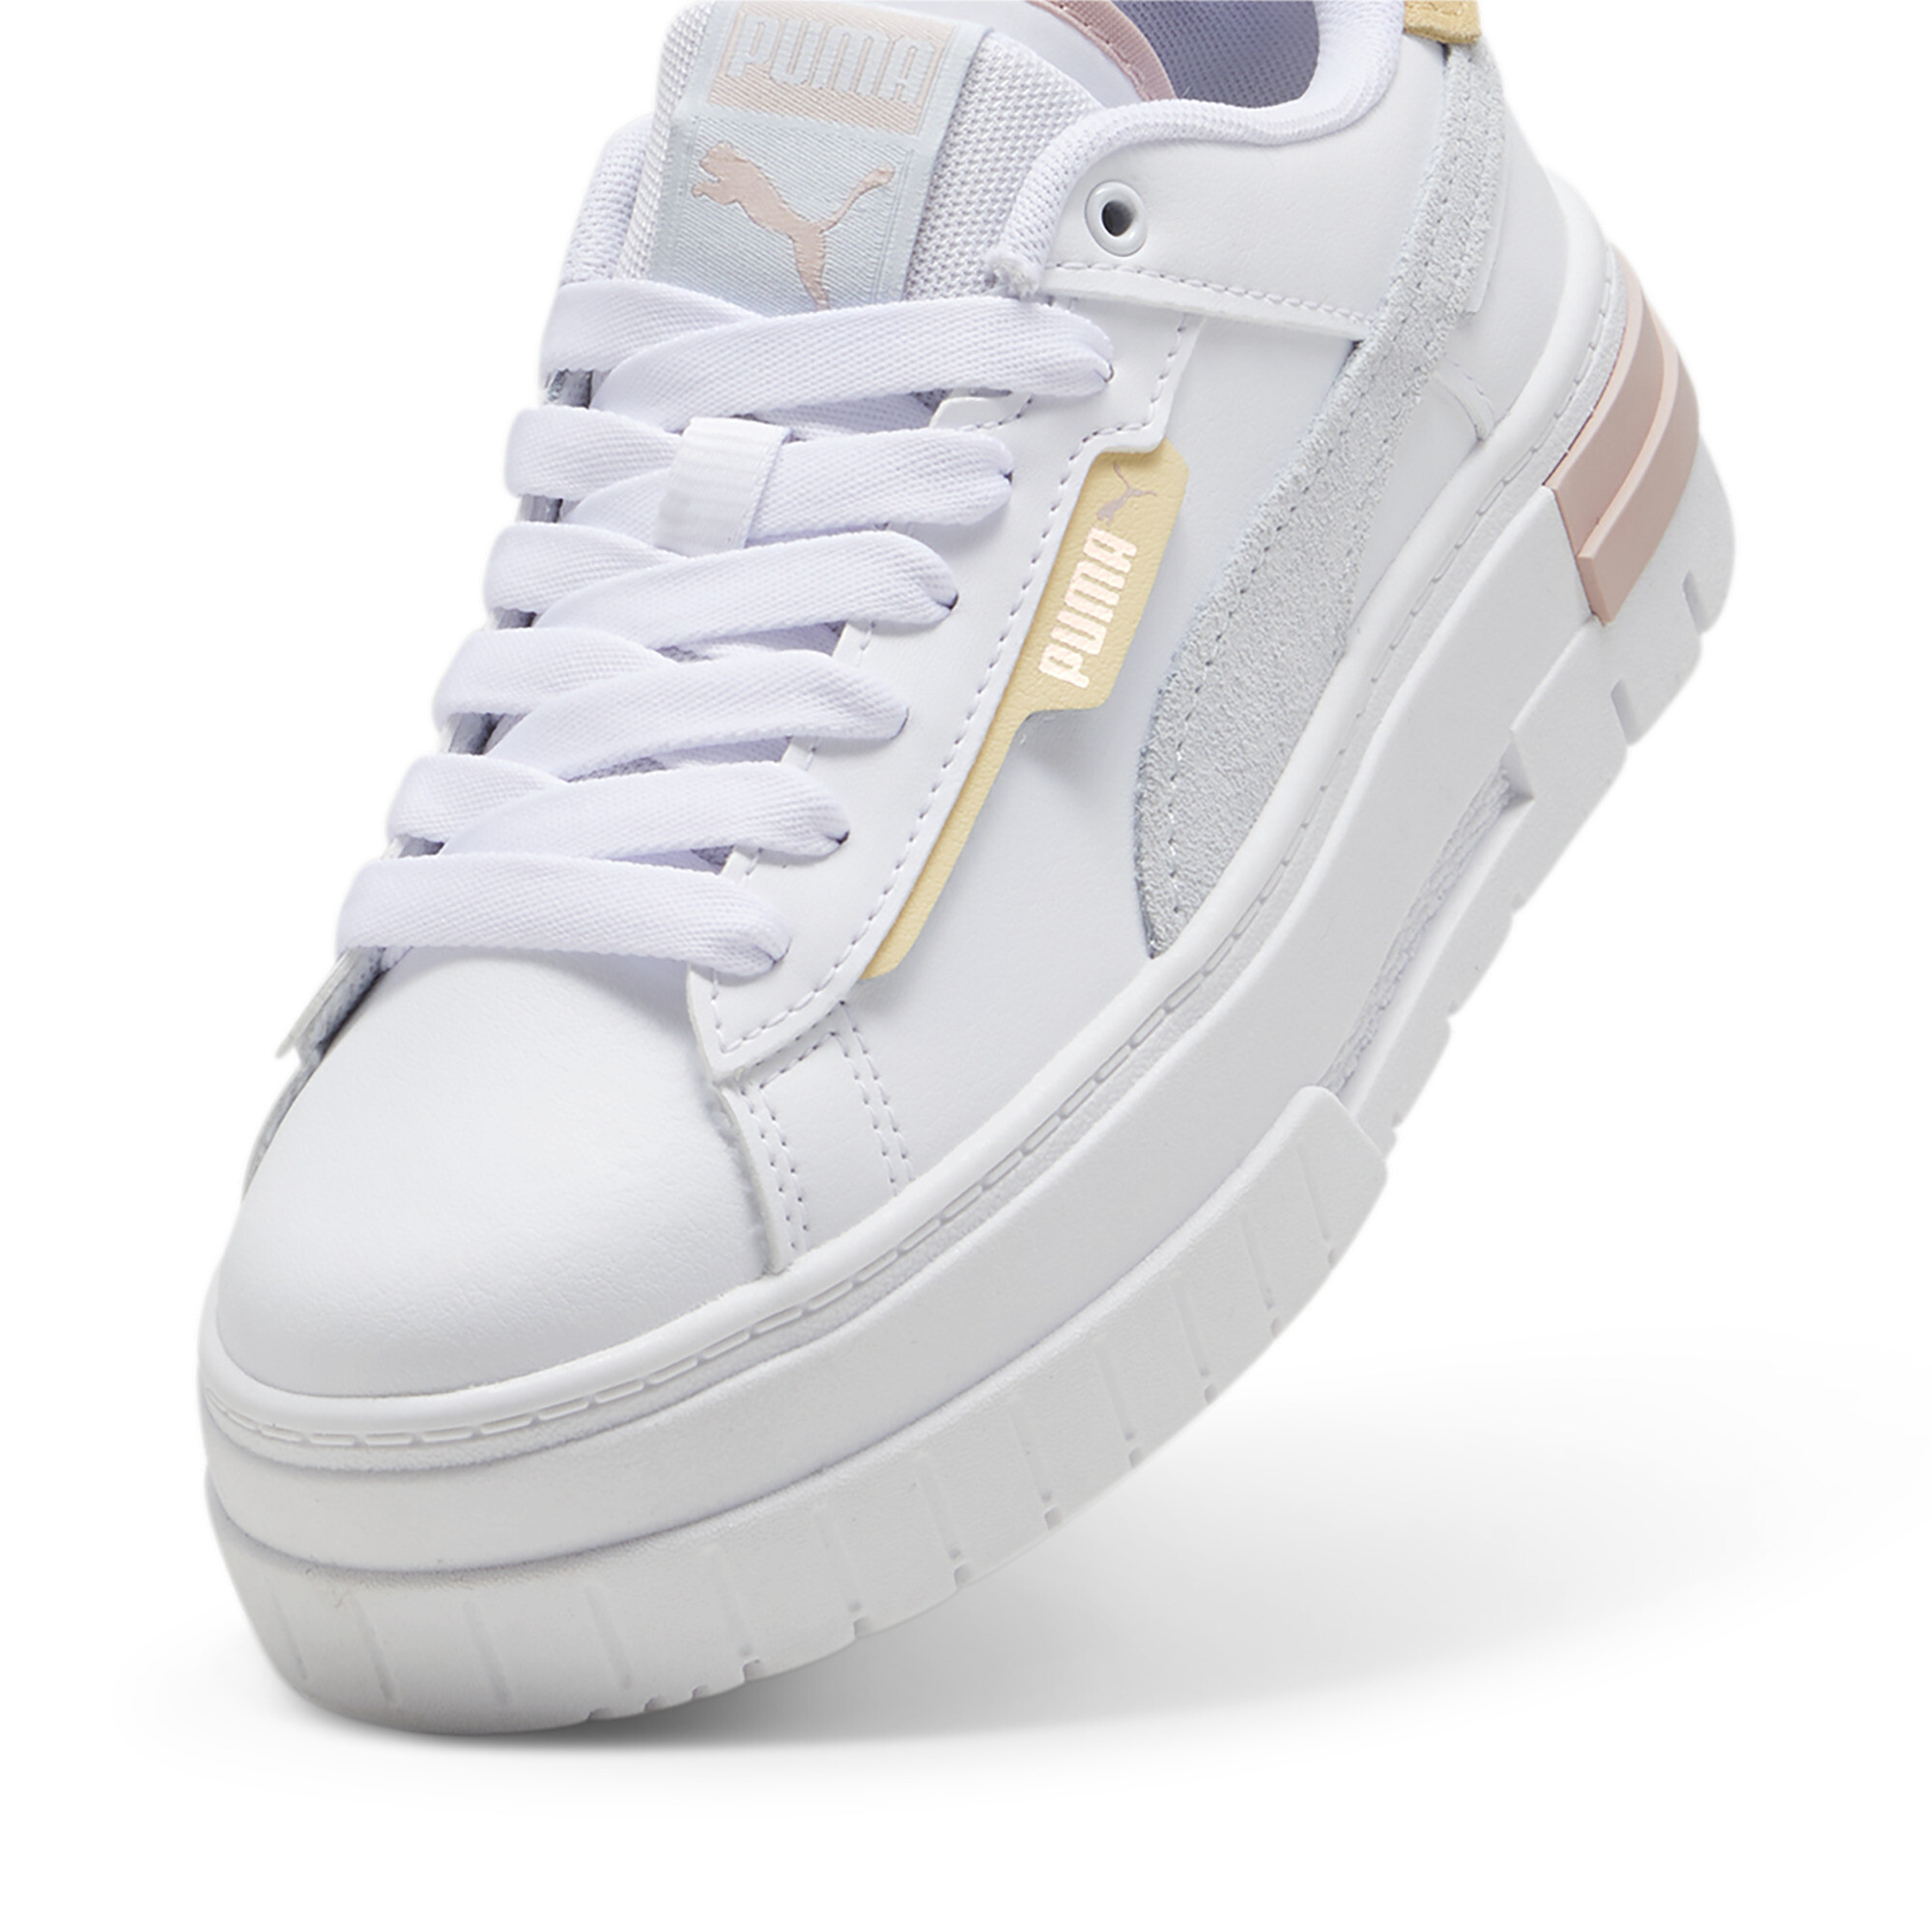 Women's Puma Mayze Crashed Youth Sneakers, White, Size 39, Shoes